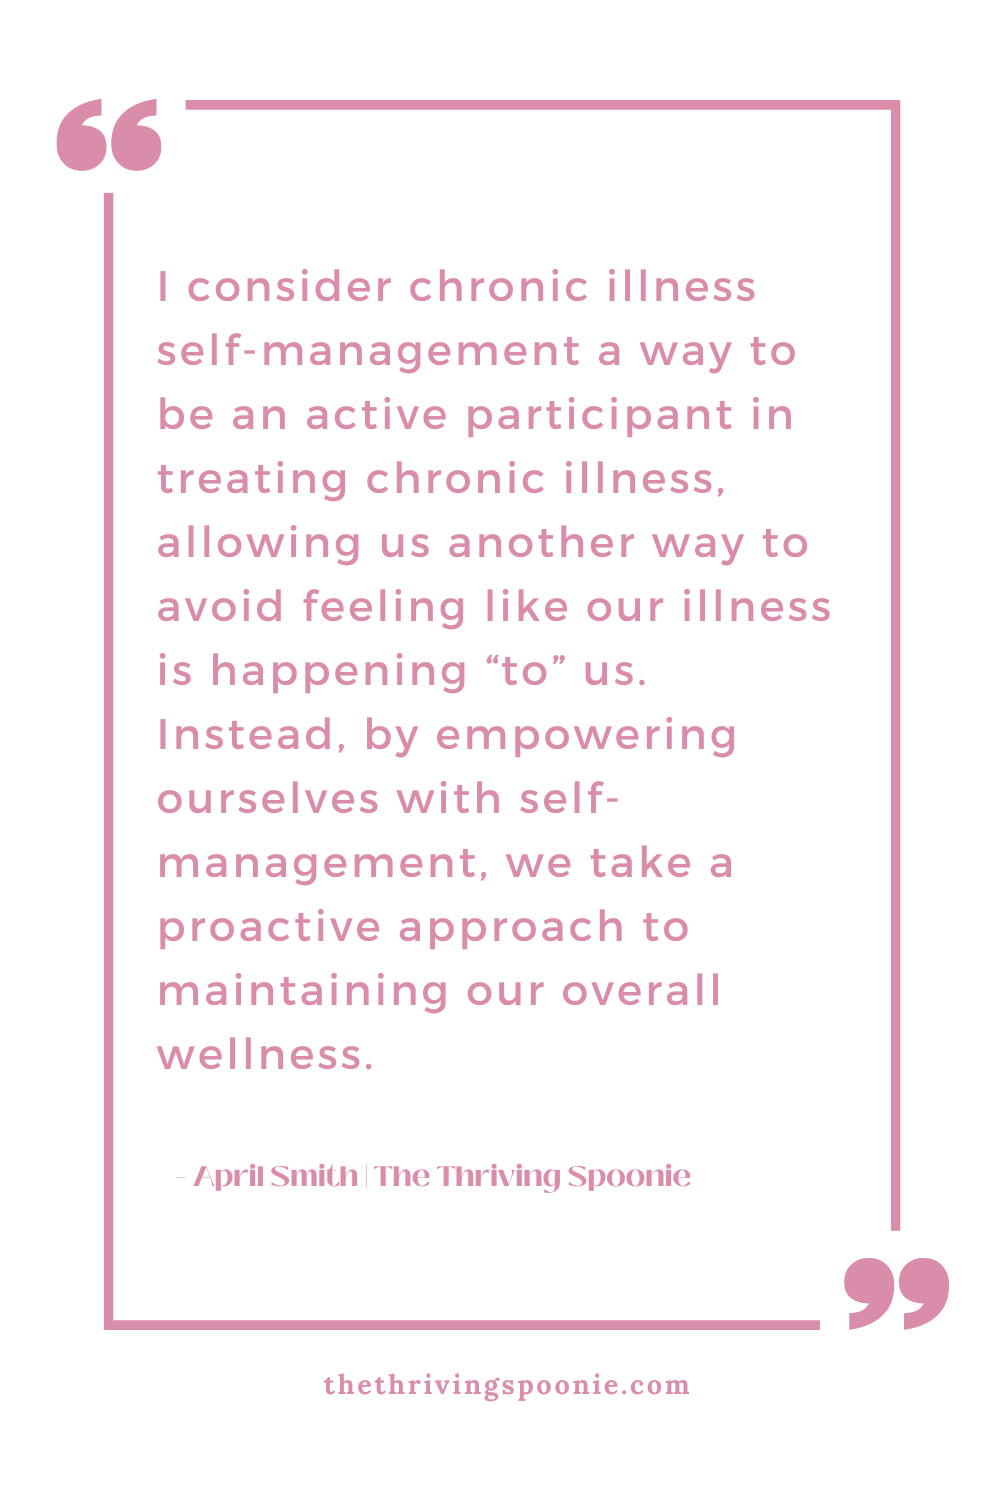 Quote by April Smith about Chronic Illness Self-Management